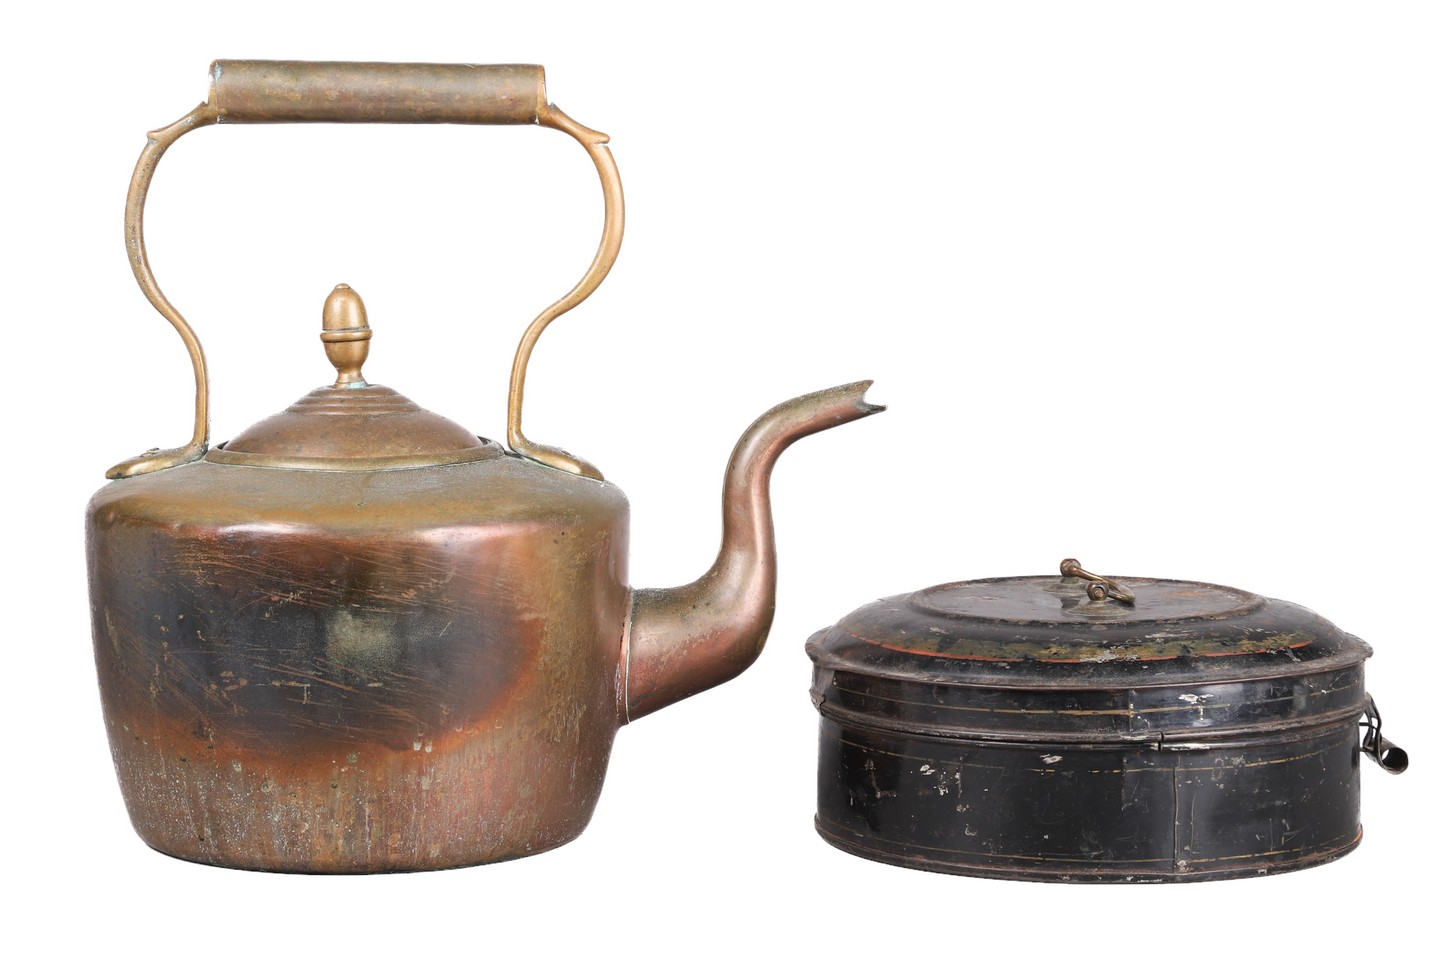 Tole painted spice box and kettle 27a64e